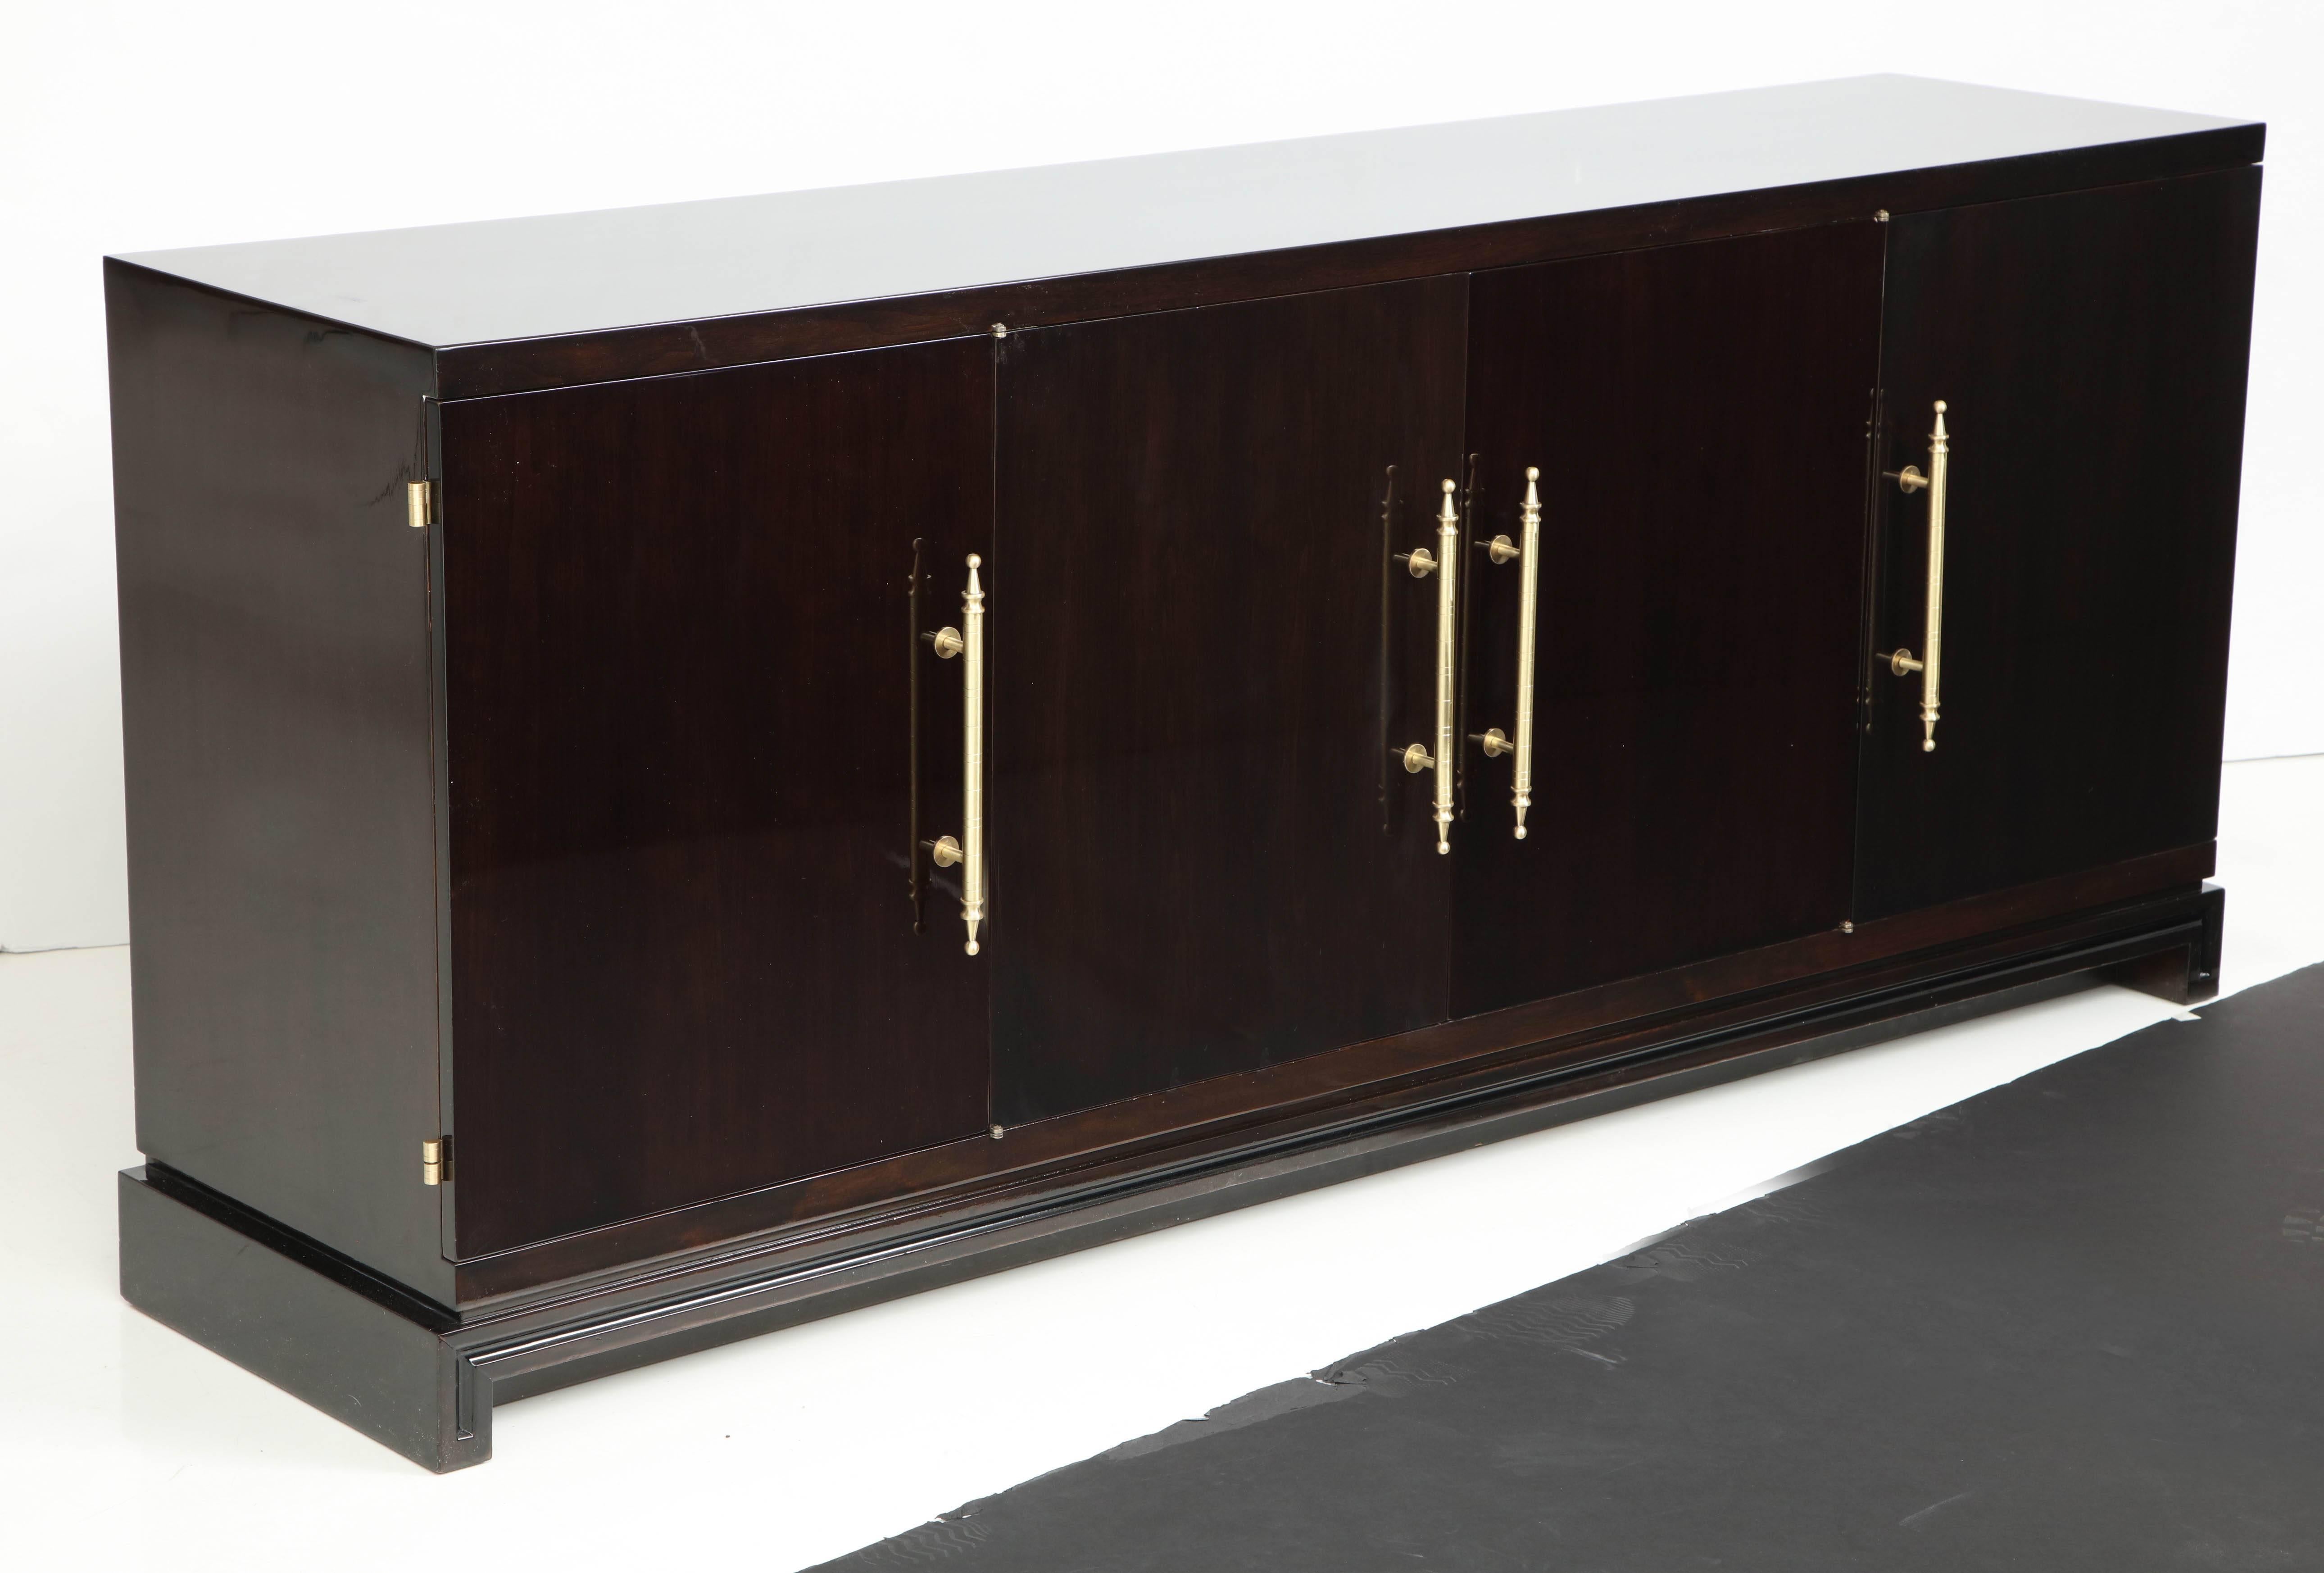 Refined and tailored midcentury Classic ebonized mahogany credenza with a three storage compartments, the center compartment housing two drawers and a shelf, the outer compartments having adjustable shelves. The case is a rich dark brown with a